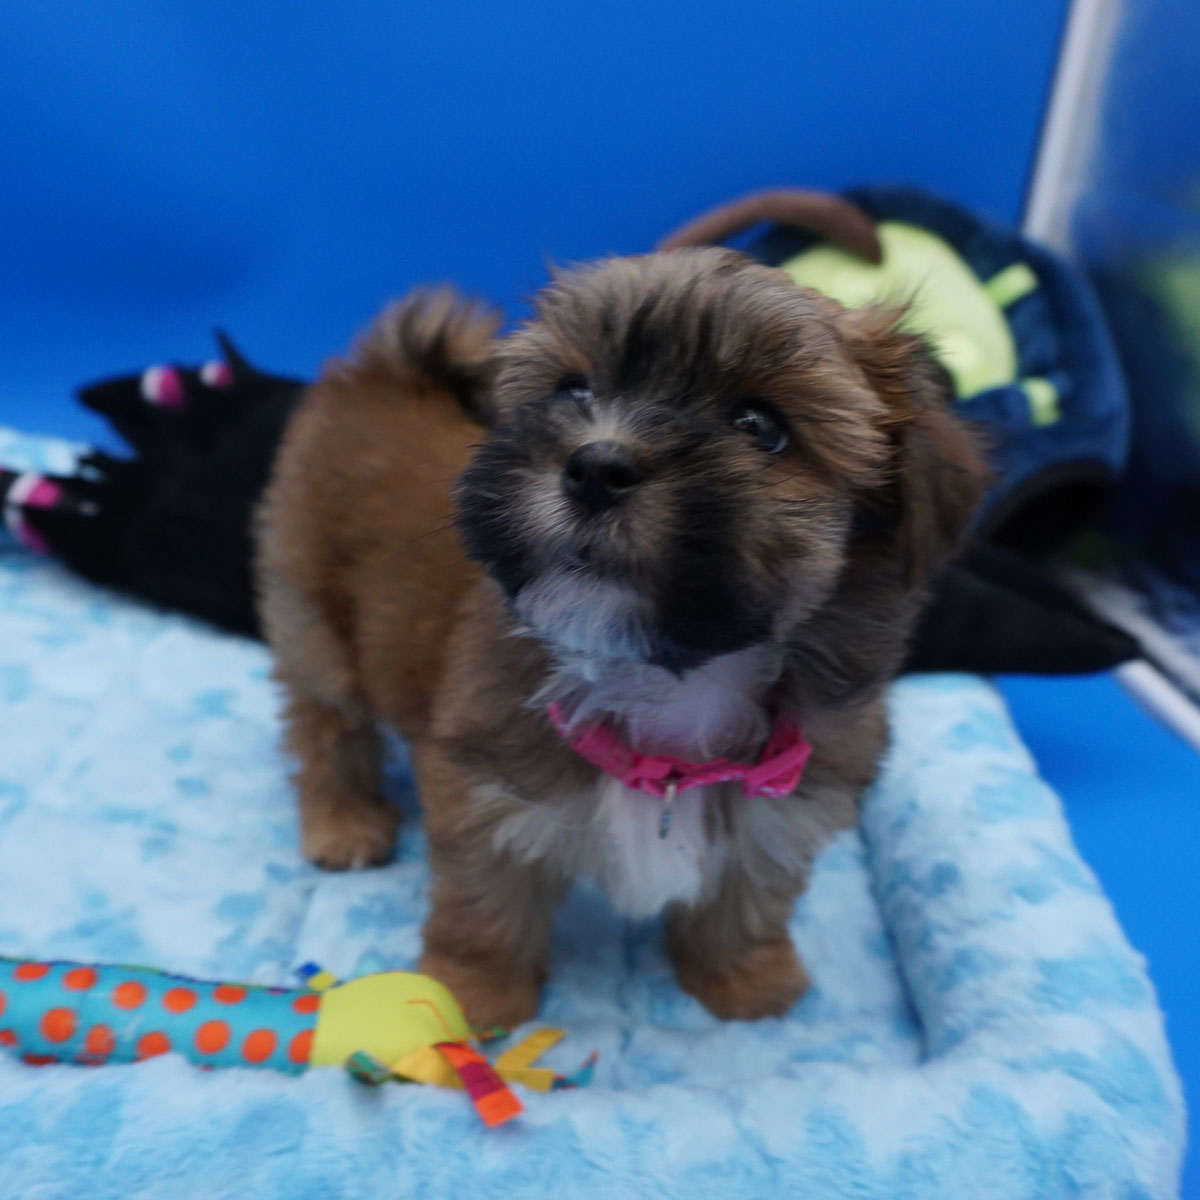 Daisey - Sable female - 7 weeks old